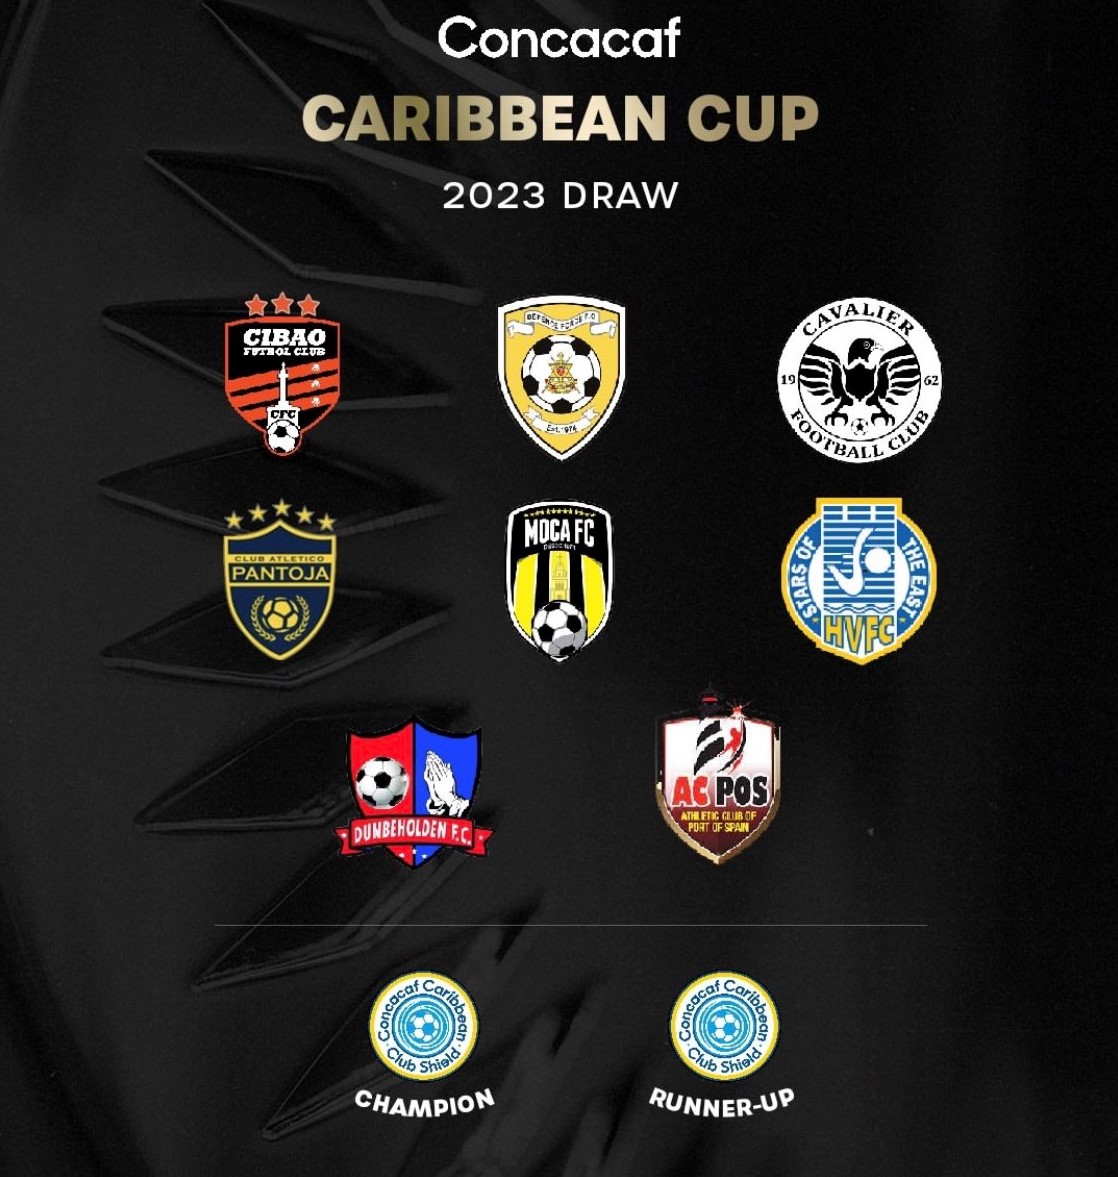 Concacaf confirms 2023 Caribbean Club Competitions draws details.